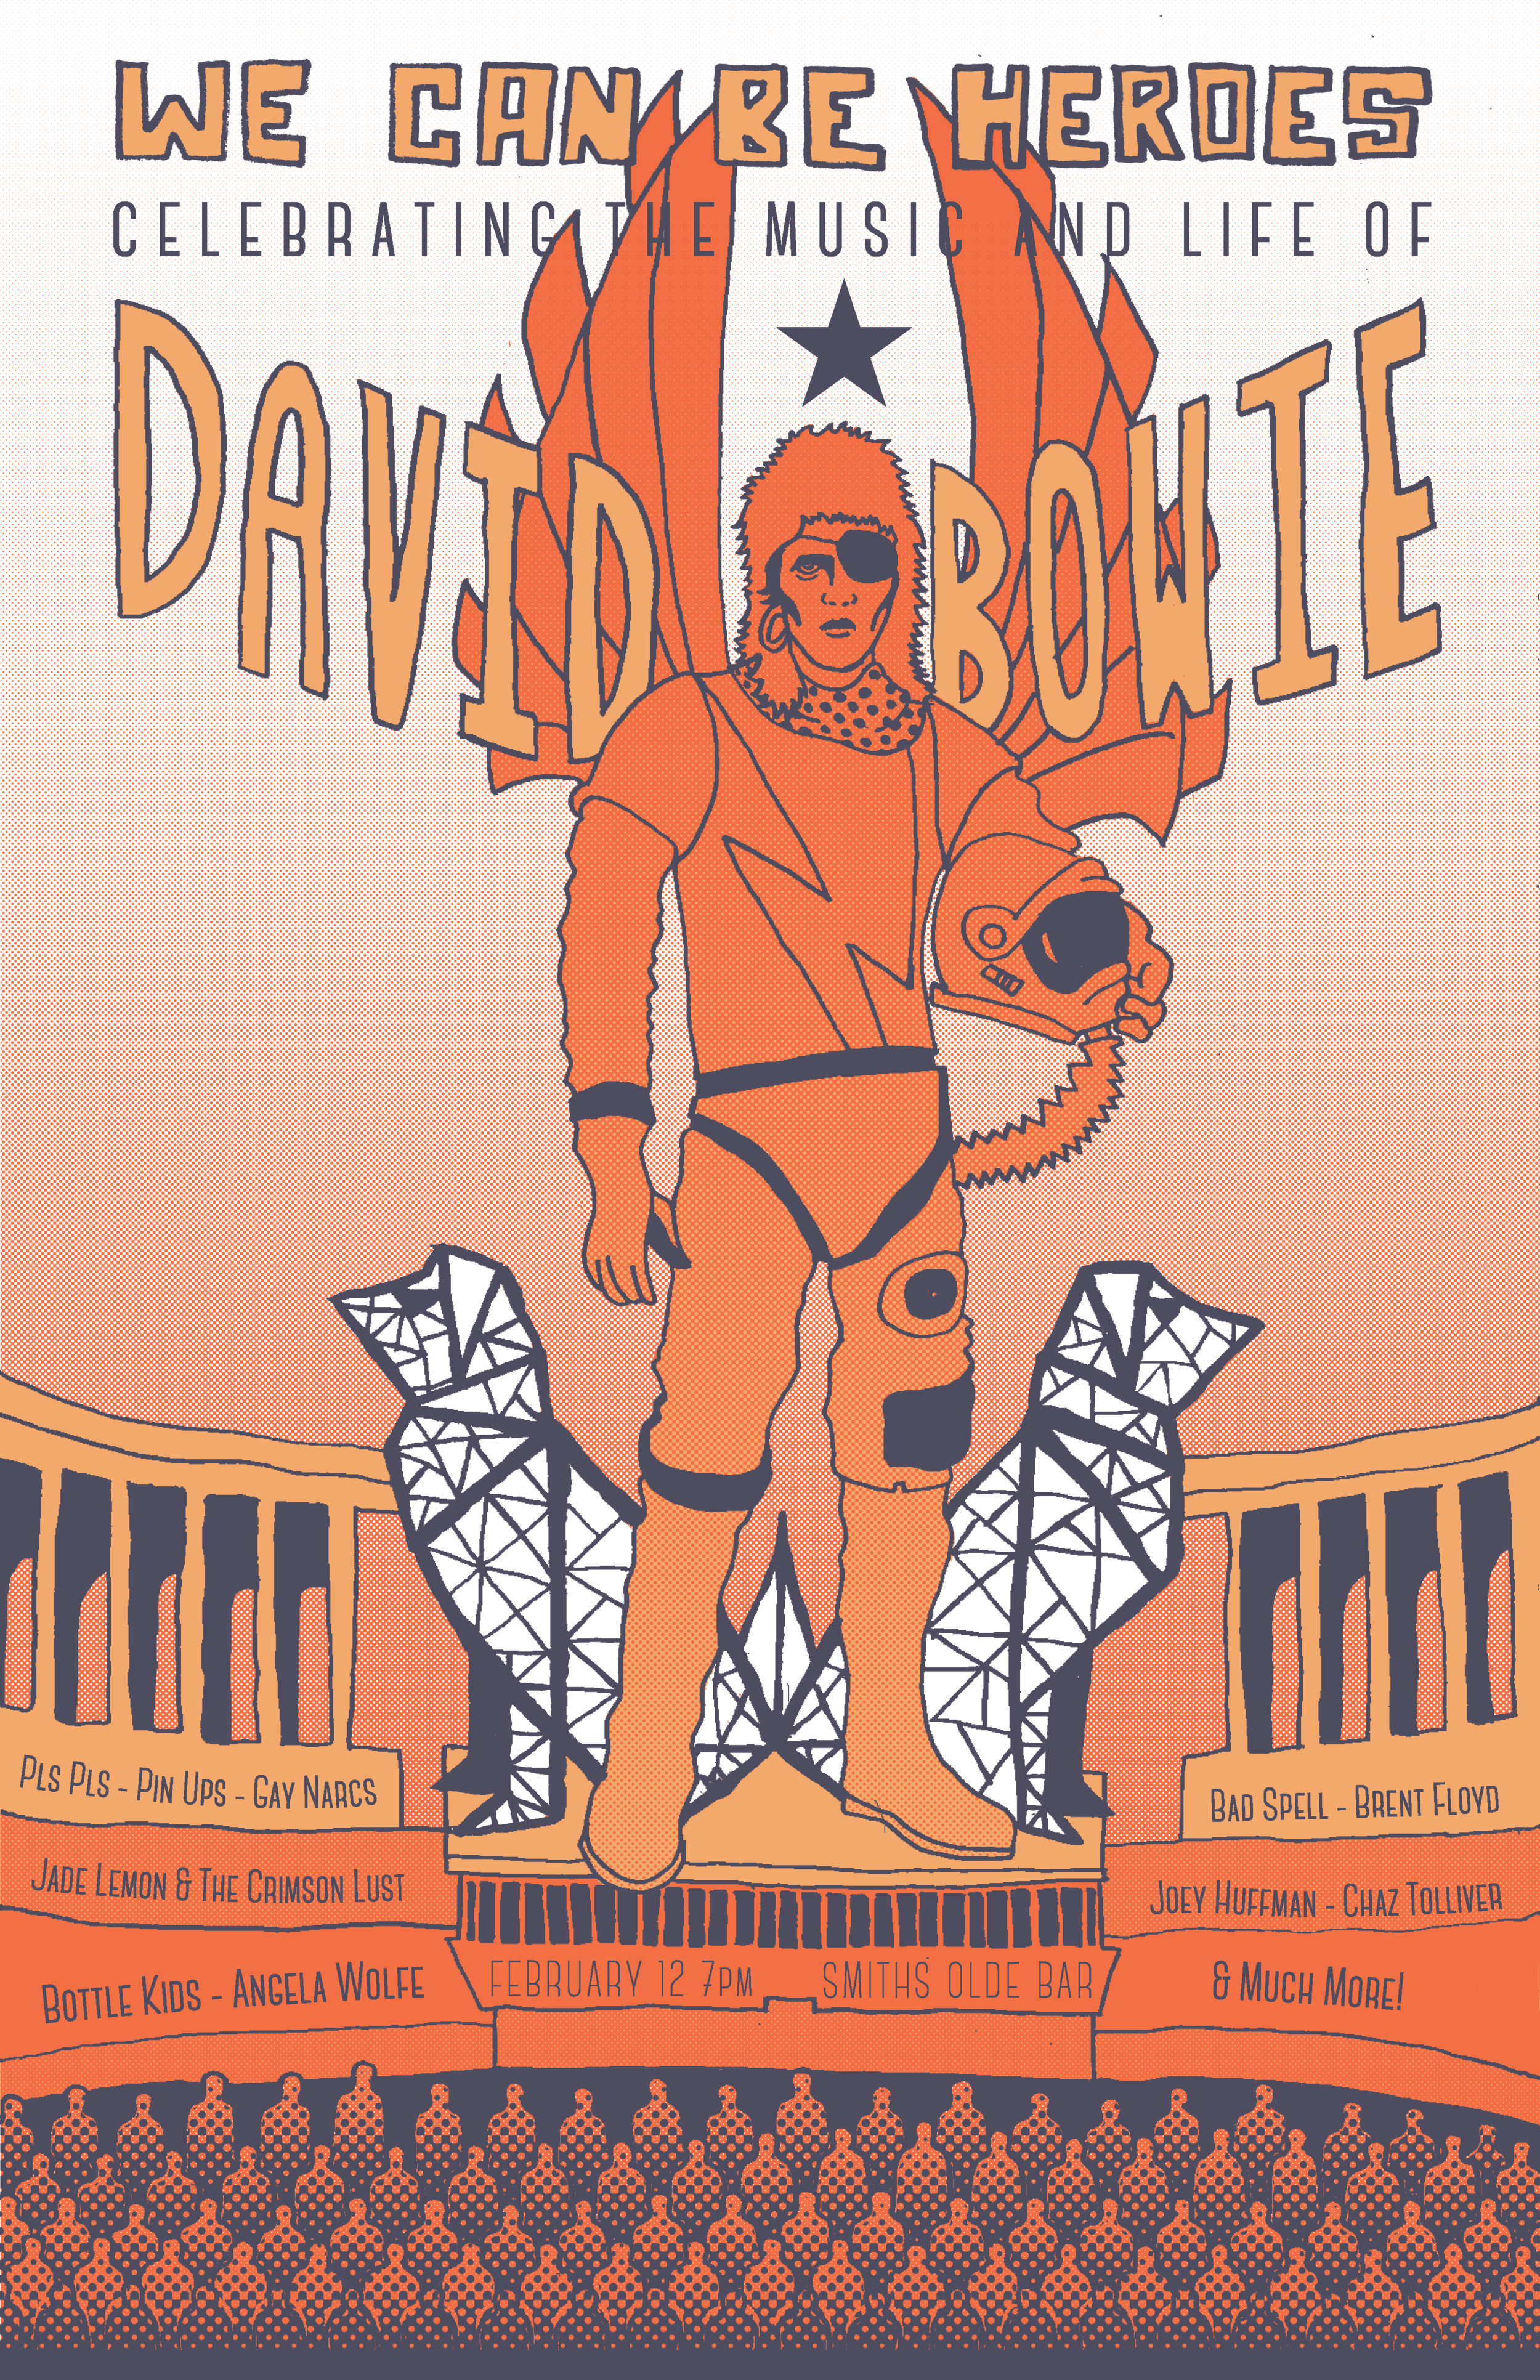 David Bowie Tribute Show Poster